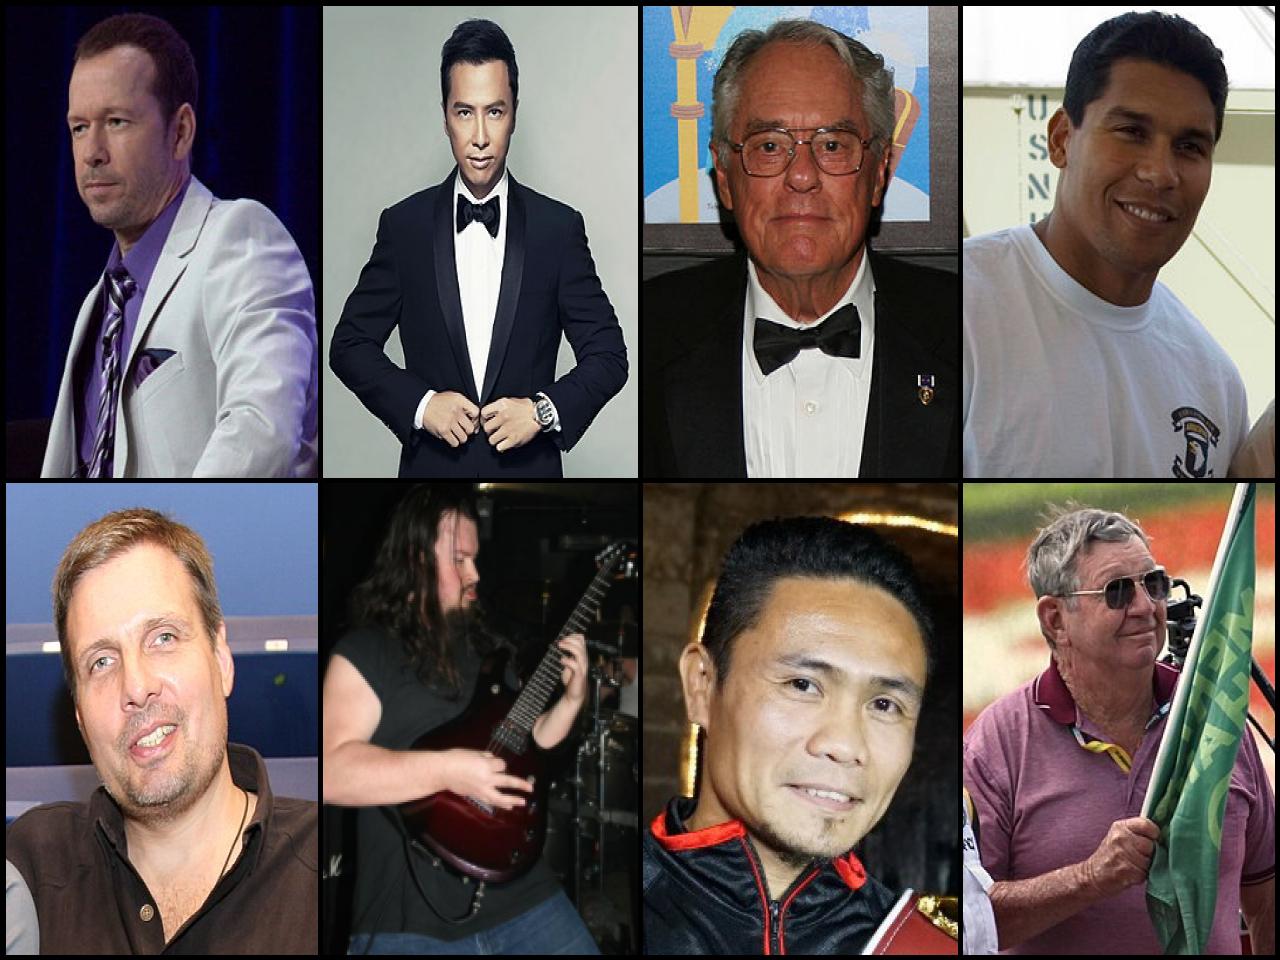 List of Famous people named <b>Donnie</b>